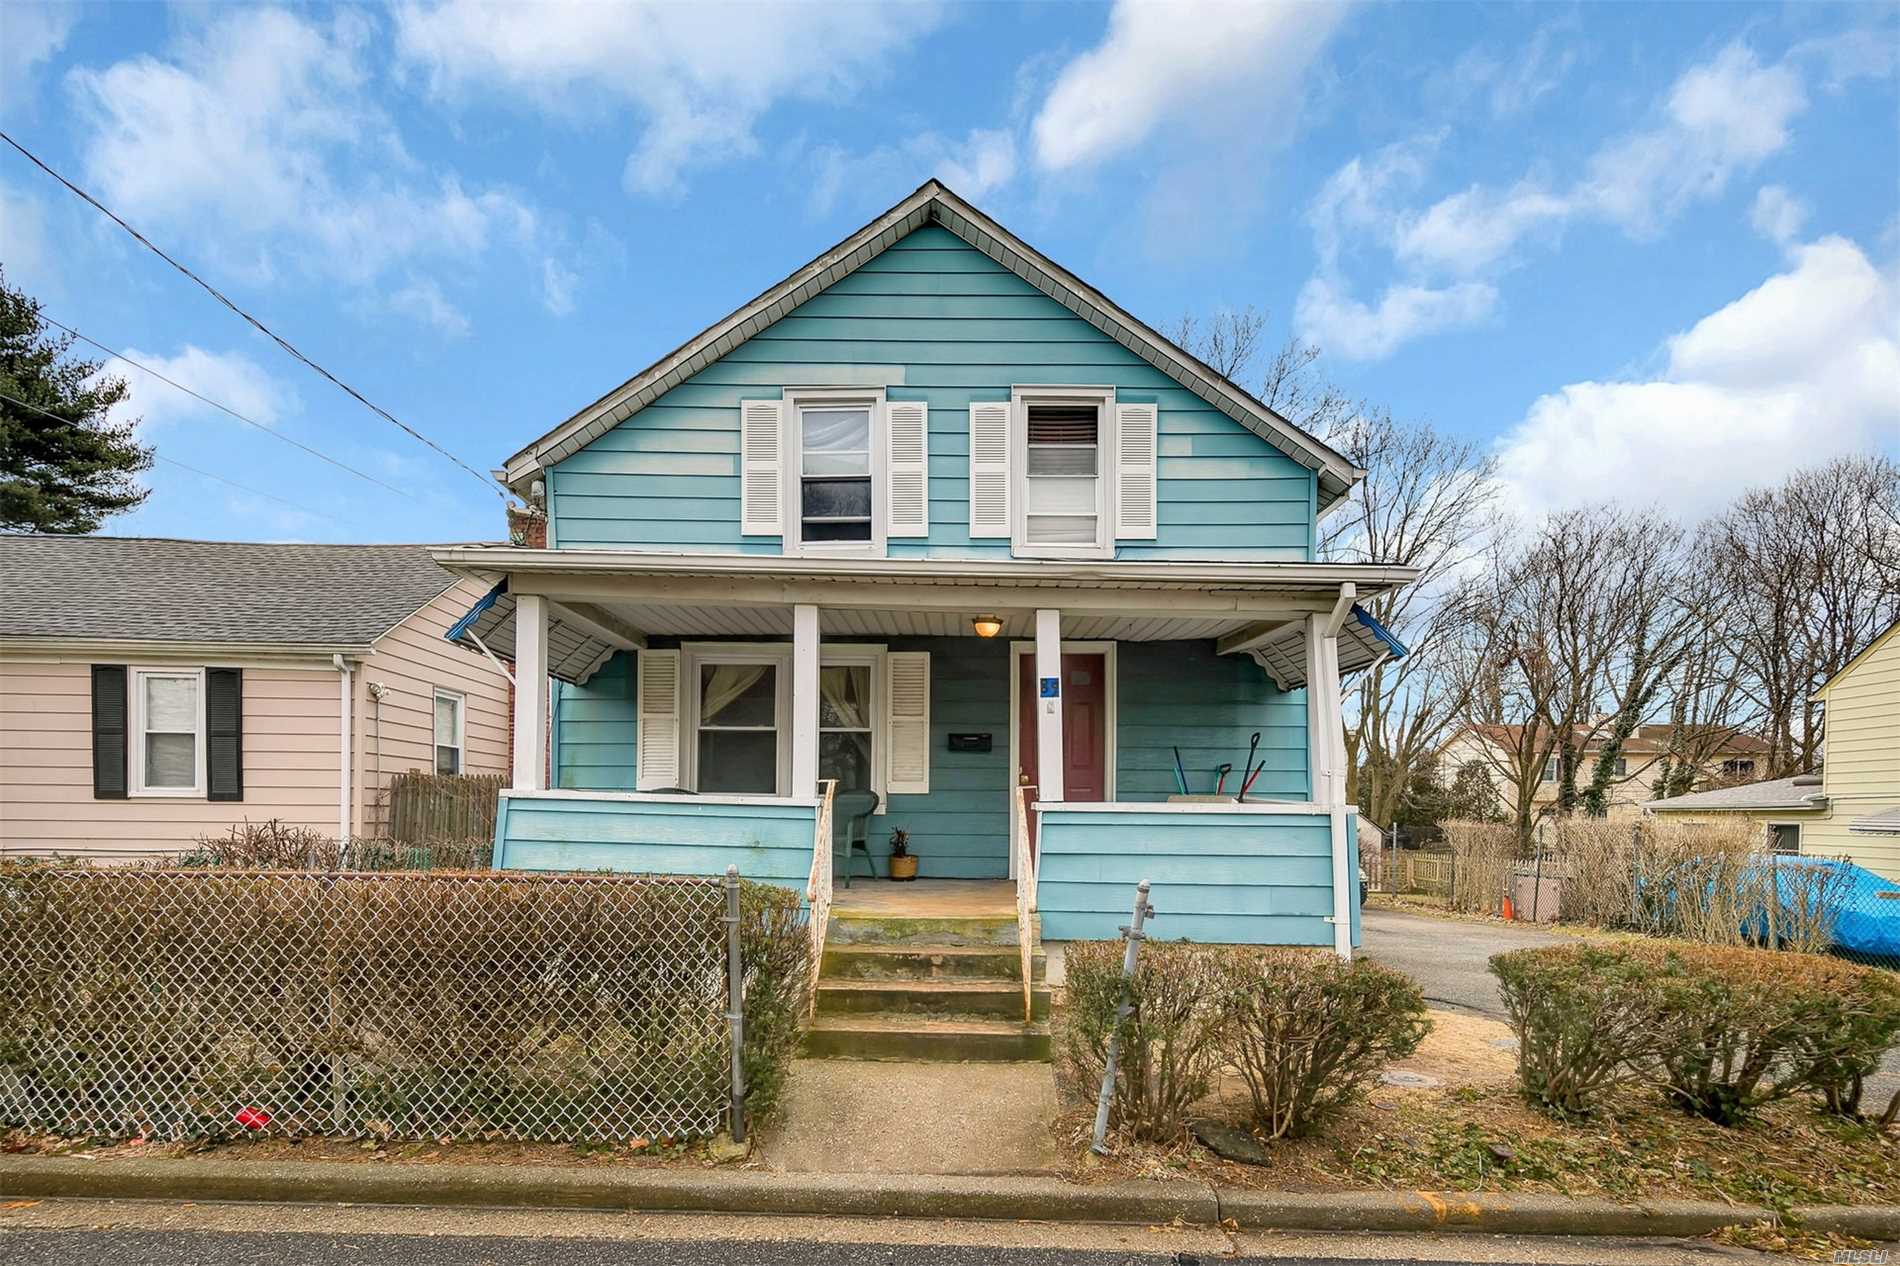 Sun-Filled Charming Colonial, Three Bedroom, One Bath Home Situated On A Quiet Mid Block Street. Parking For Six Cars, Annual Rental Income $28, 800. Perfect Starter Home In Locust Valley Schools. Sold As Is.